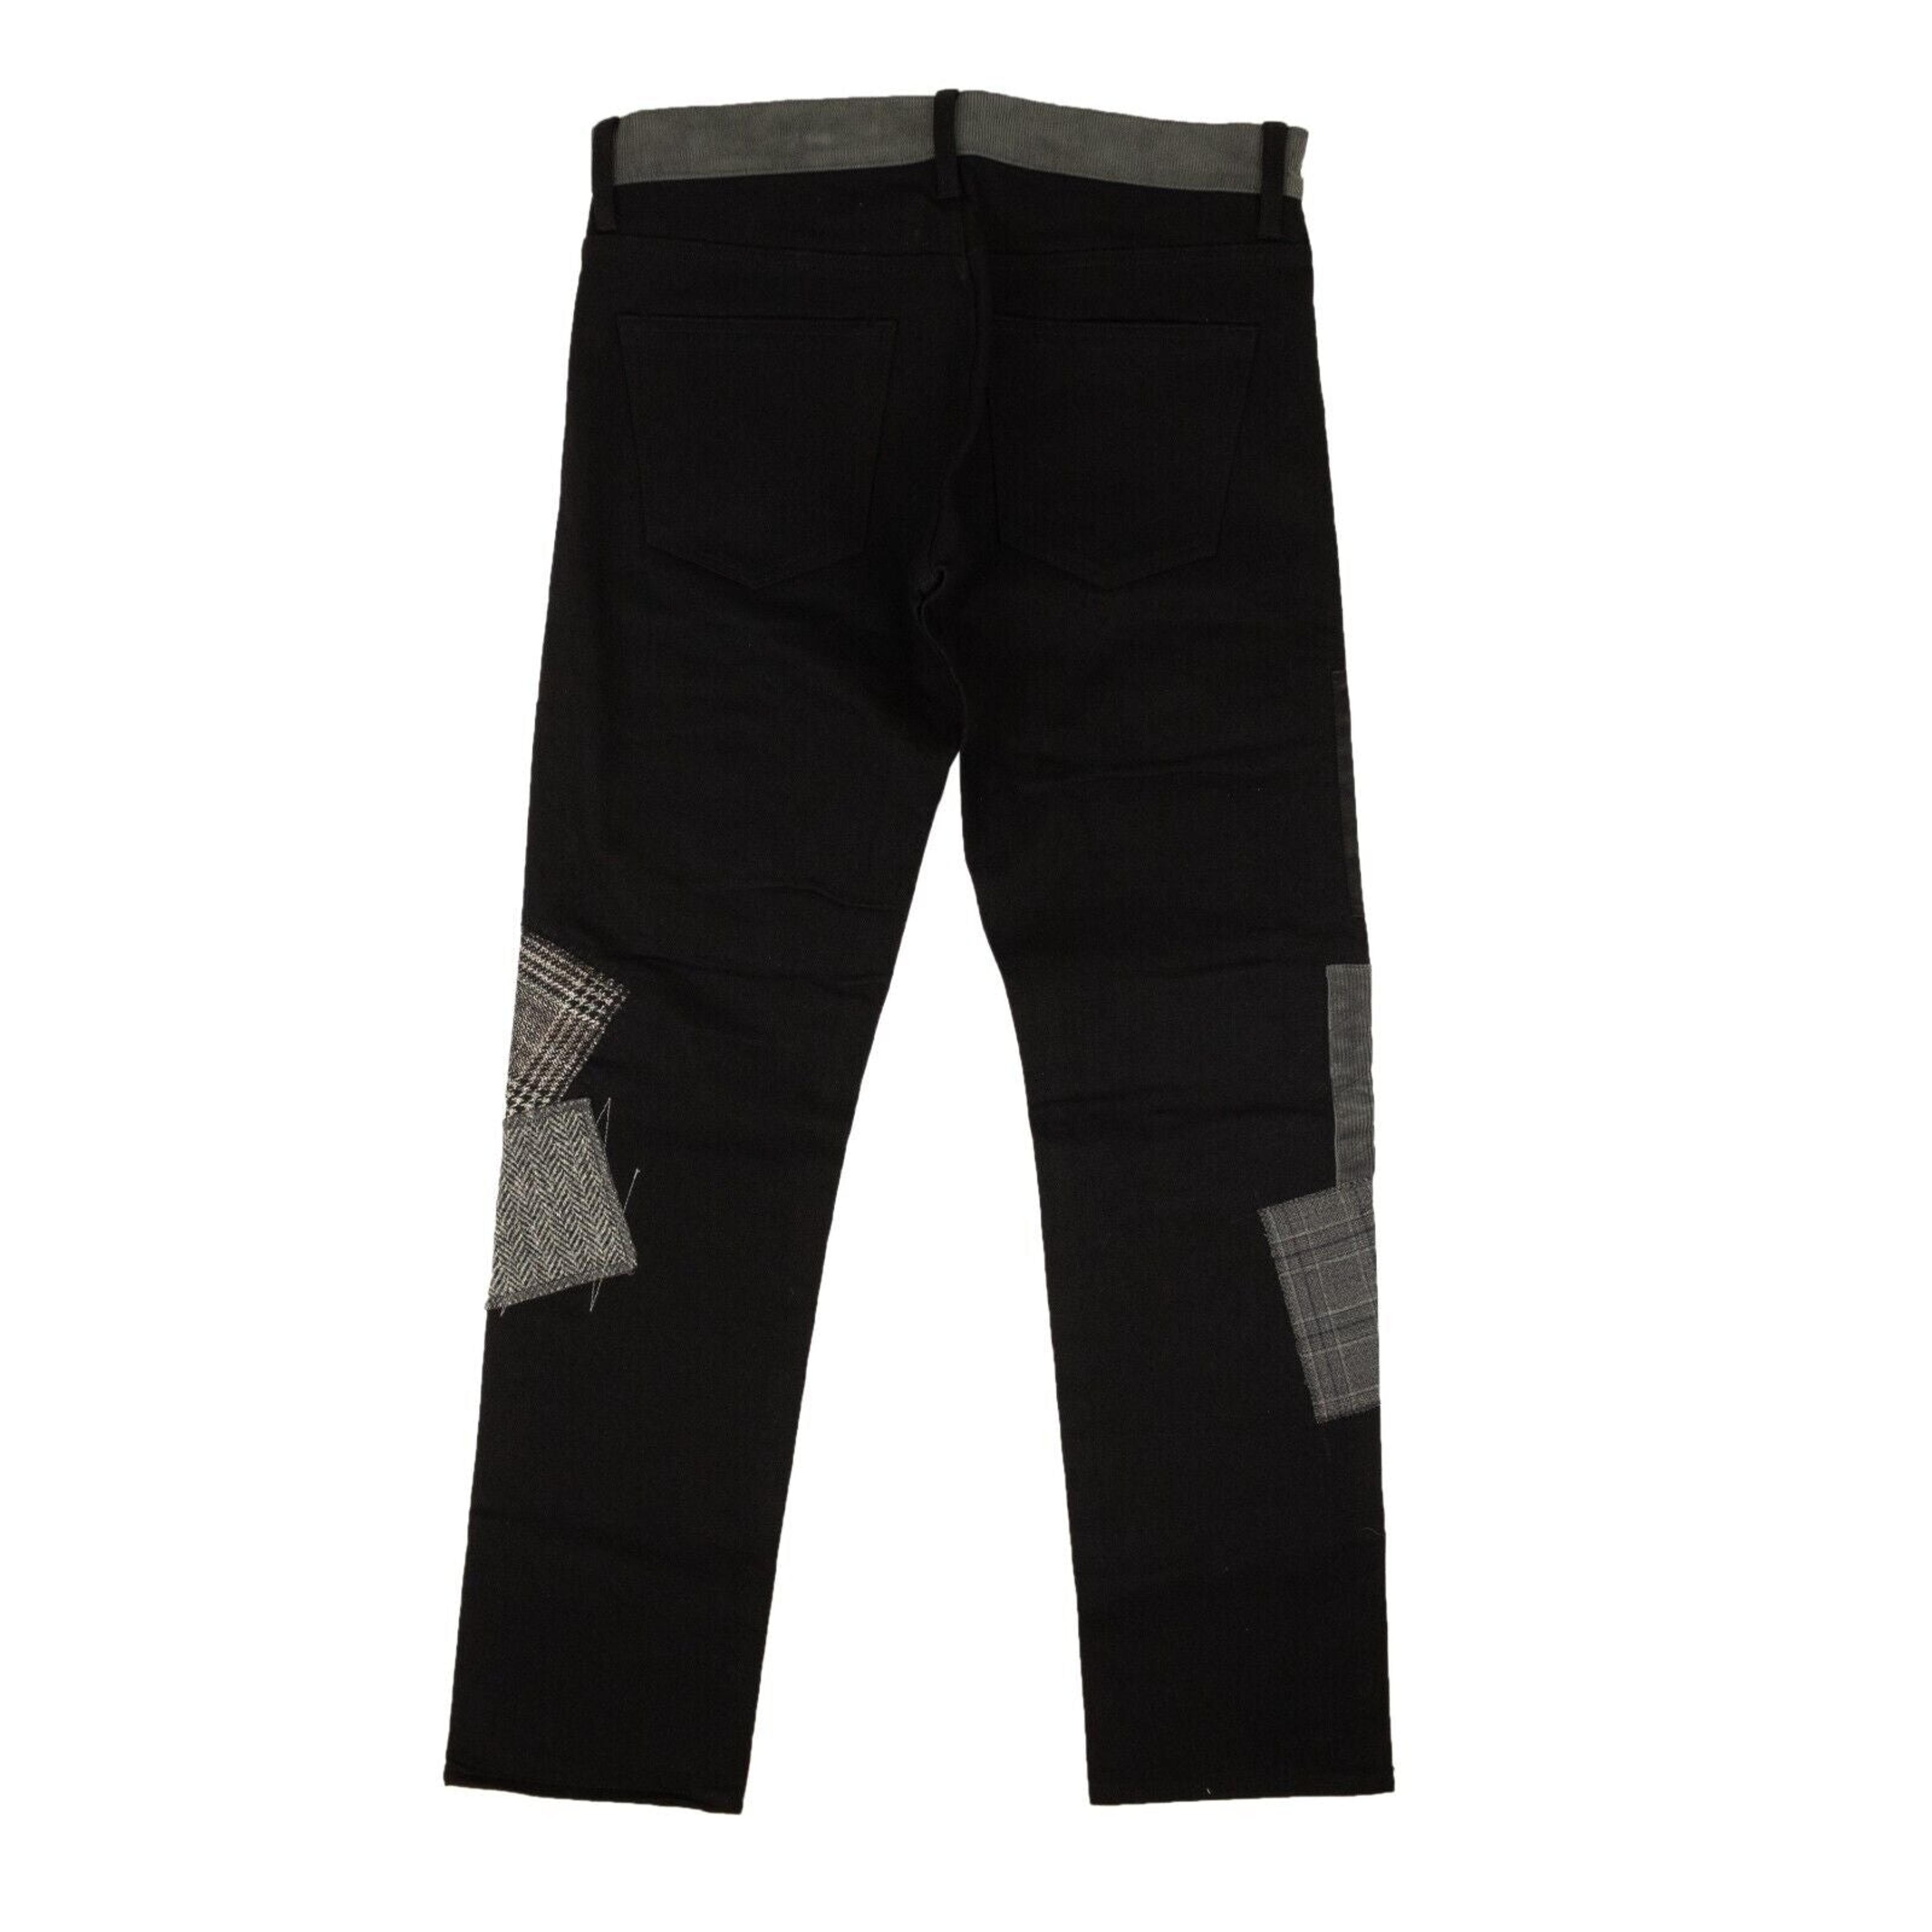 Alternate View 2 of Black And Grey Cotton Patchwork Detail Pants